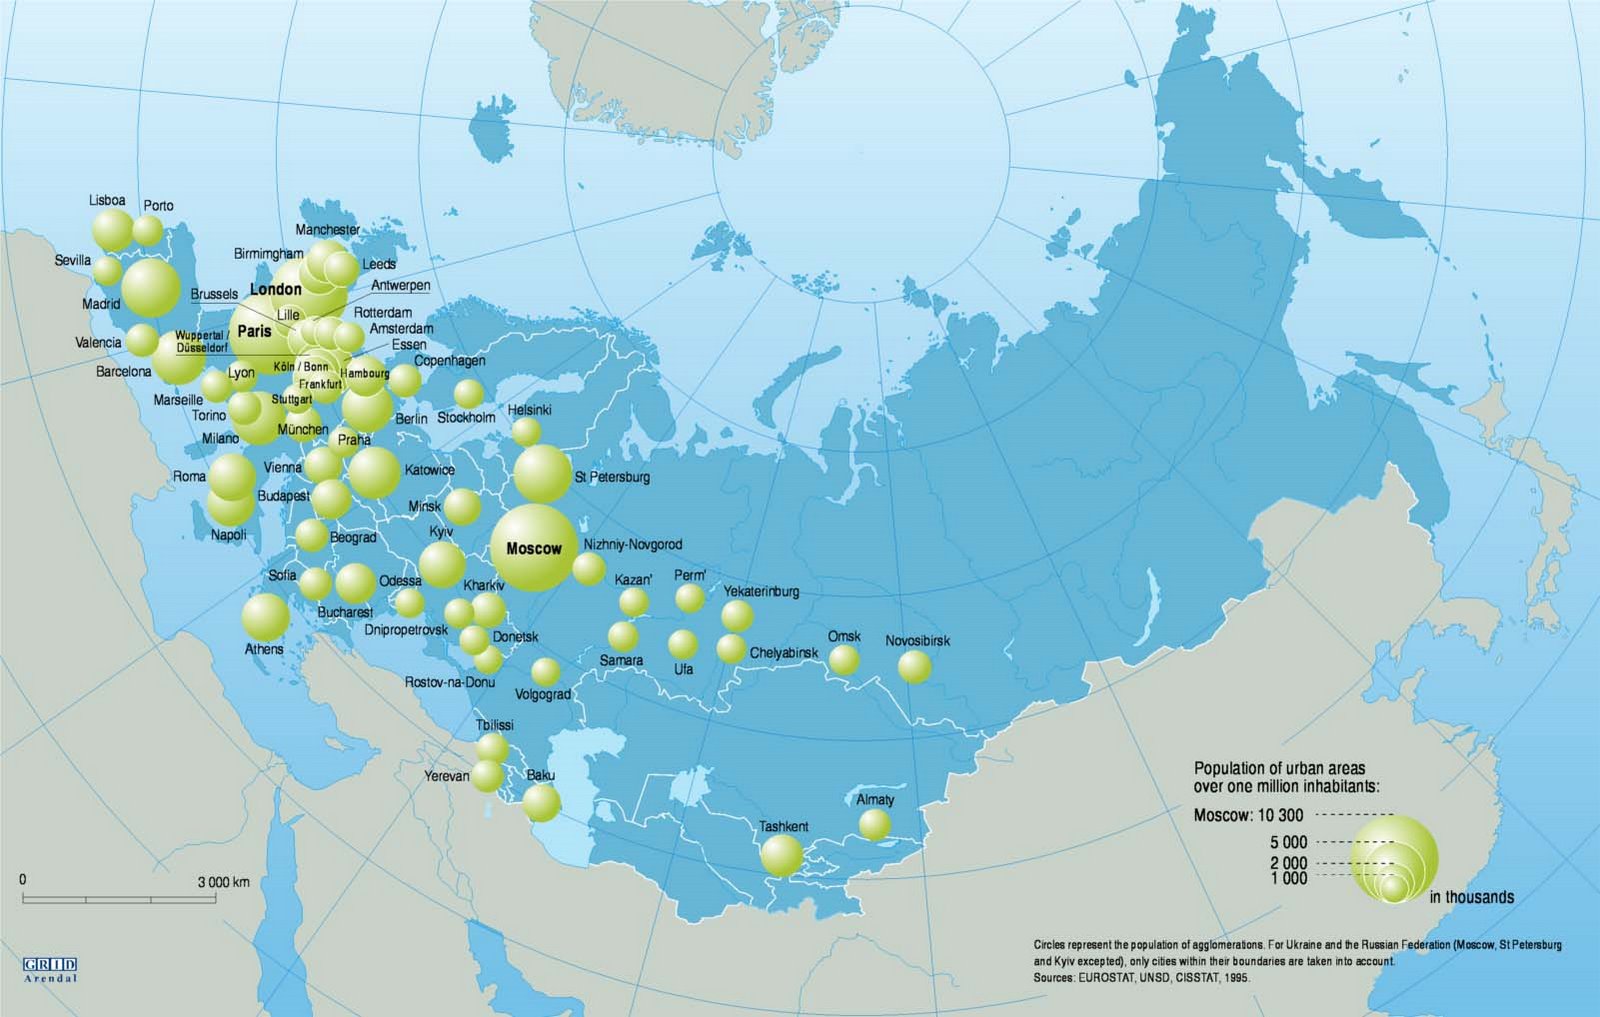 [major_cities_in_europe_russia_and_nis_with_over_one_million_inhabitants+copy.jpg]